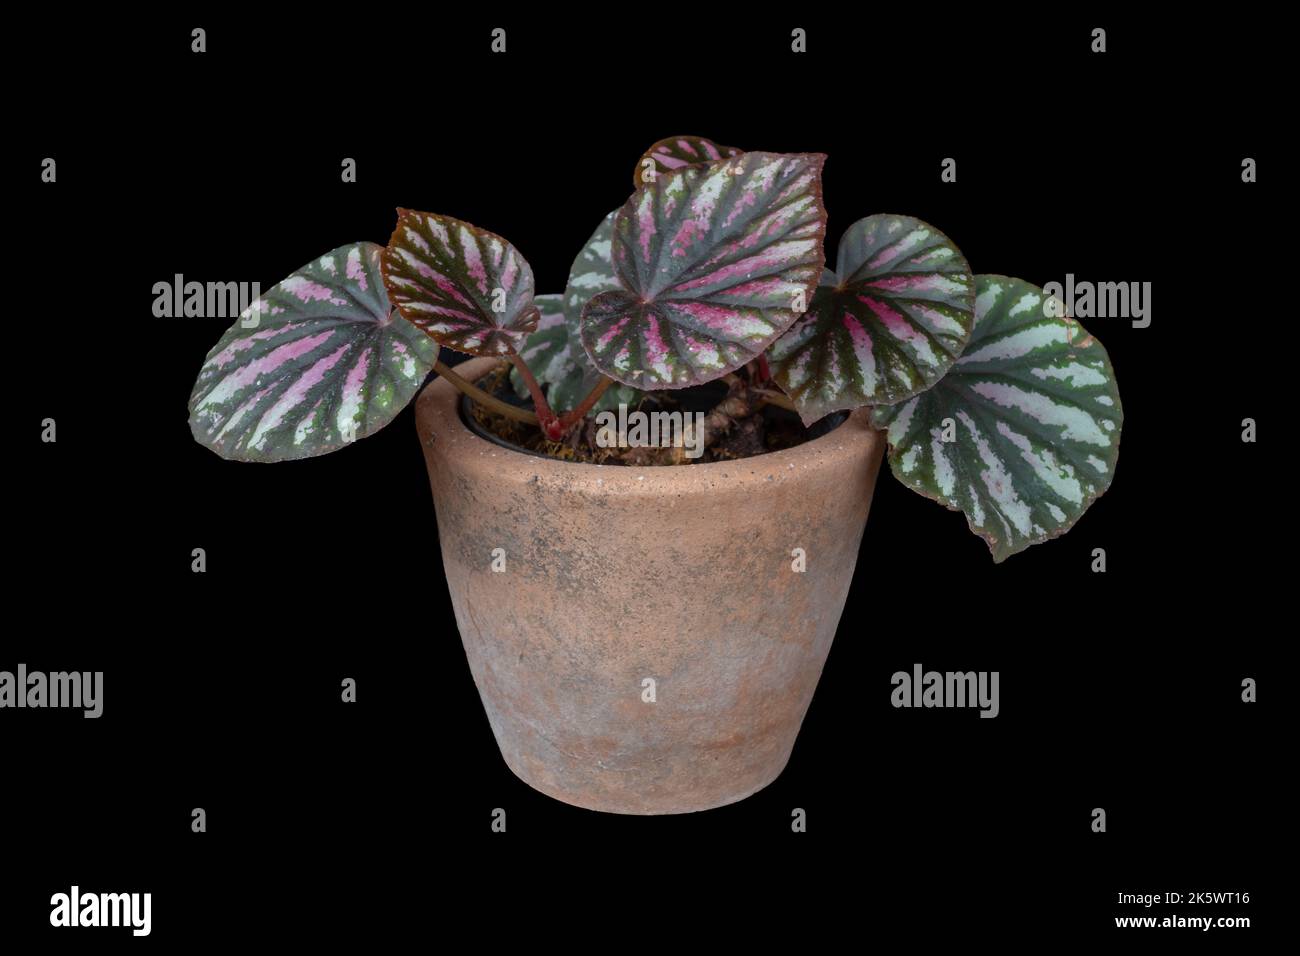 Beautiful rhizomatous begonia candy stripes hybrid with red white and green leaves in clay pot isolated on black background Stock Photo